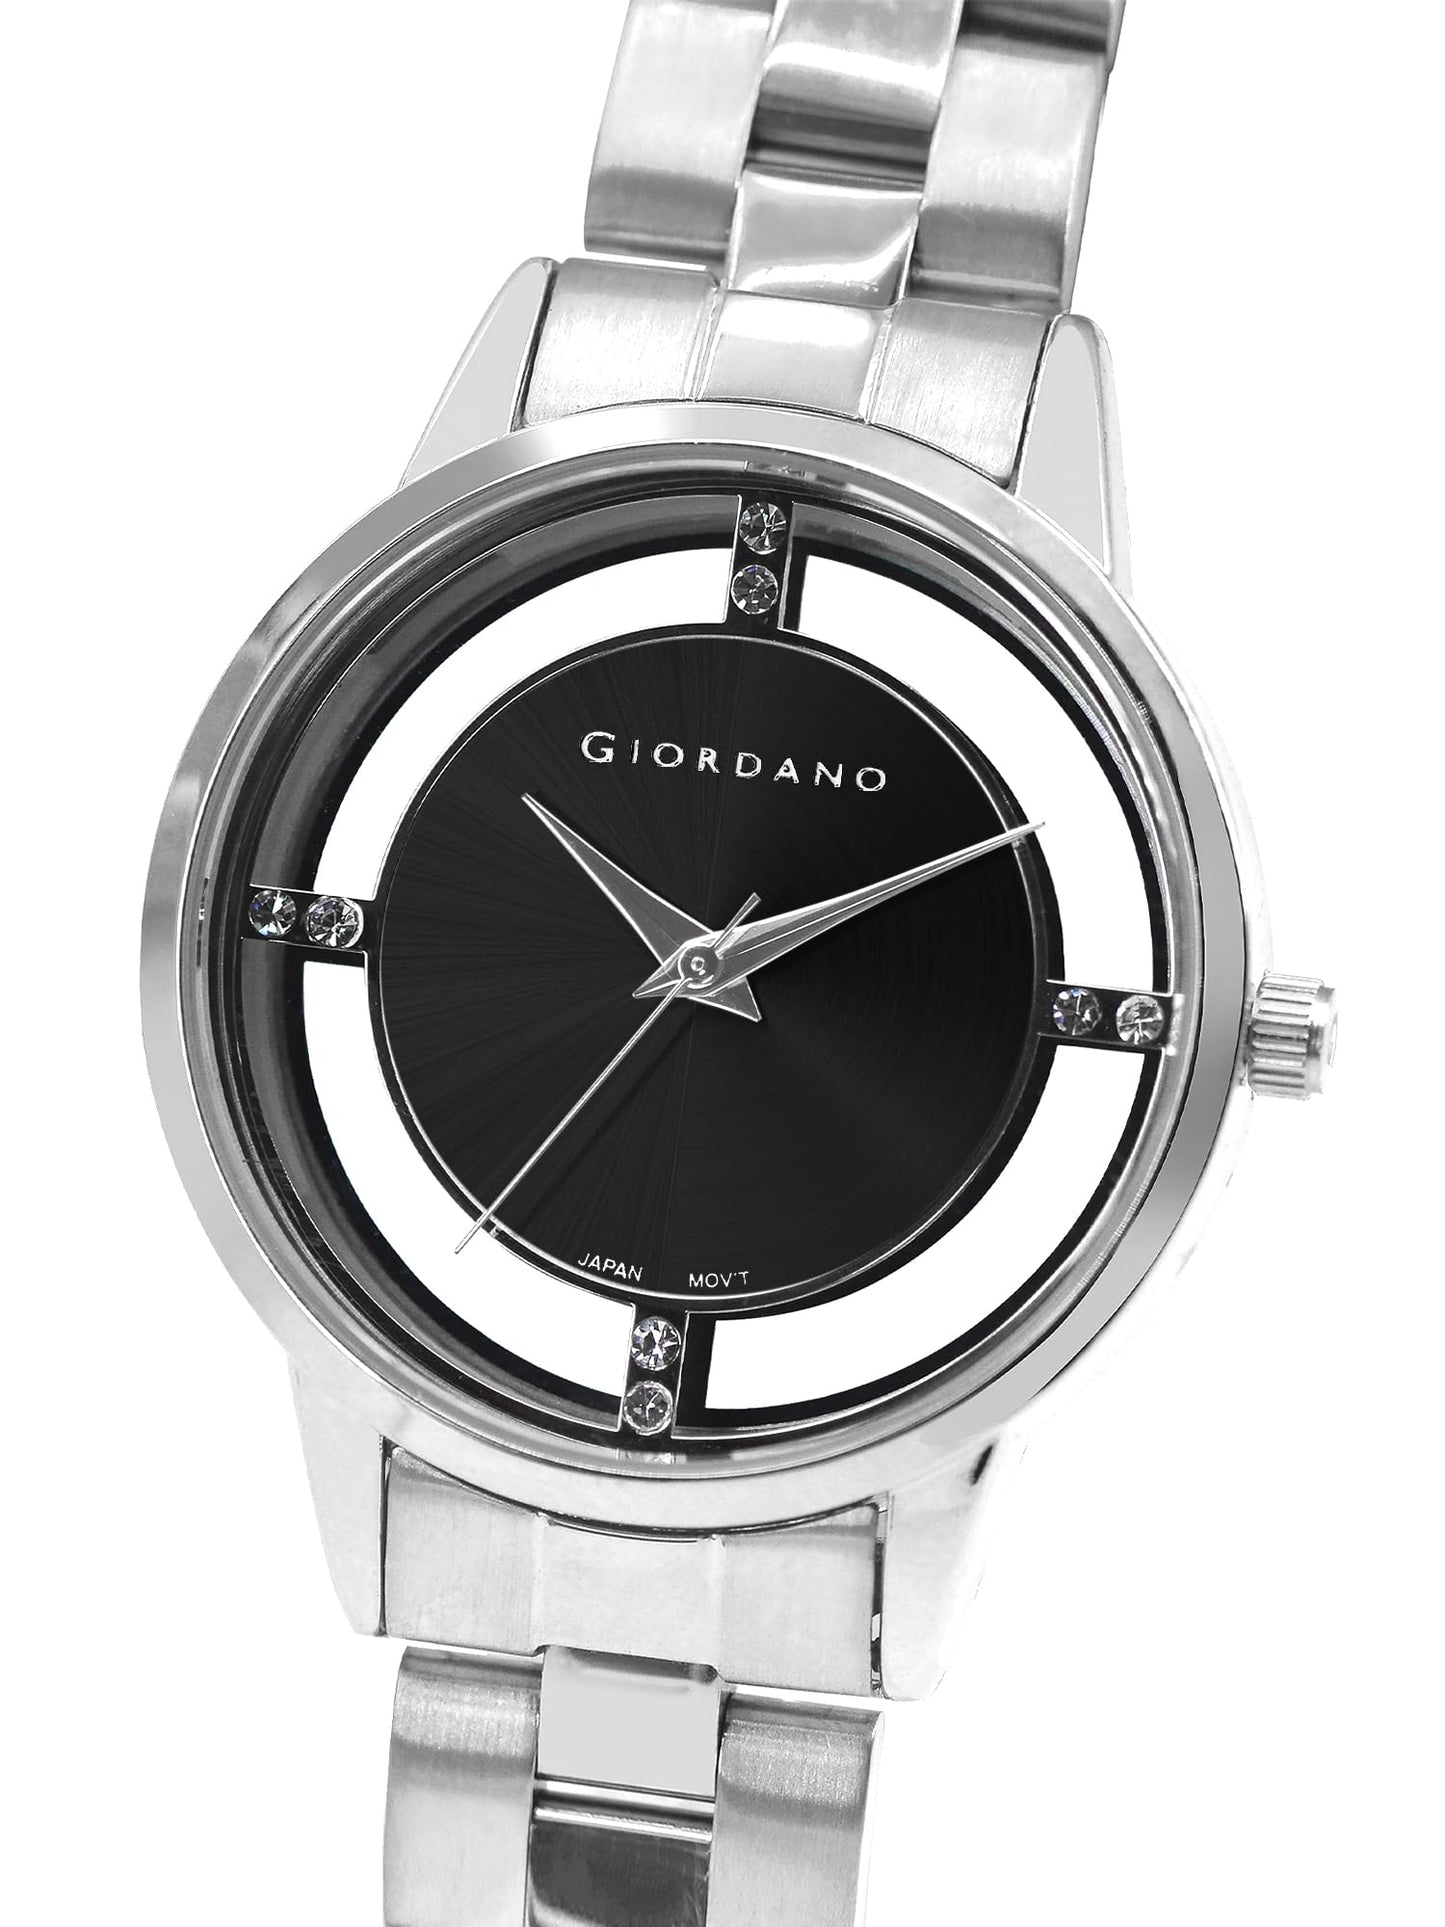 Giordano Analog Stylish Watch for Women Water Resistant Fashion Watch Round Shape with 3 Hand Mechanism Wrist Watch to Compliment Your Look/Ideal Gift for Female - GZ-60078-11